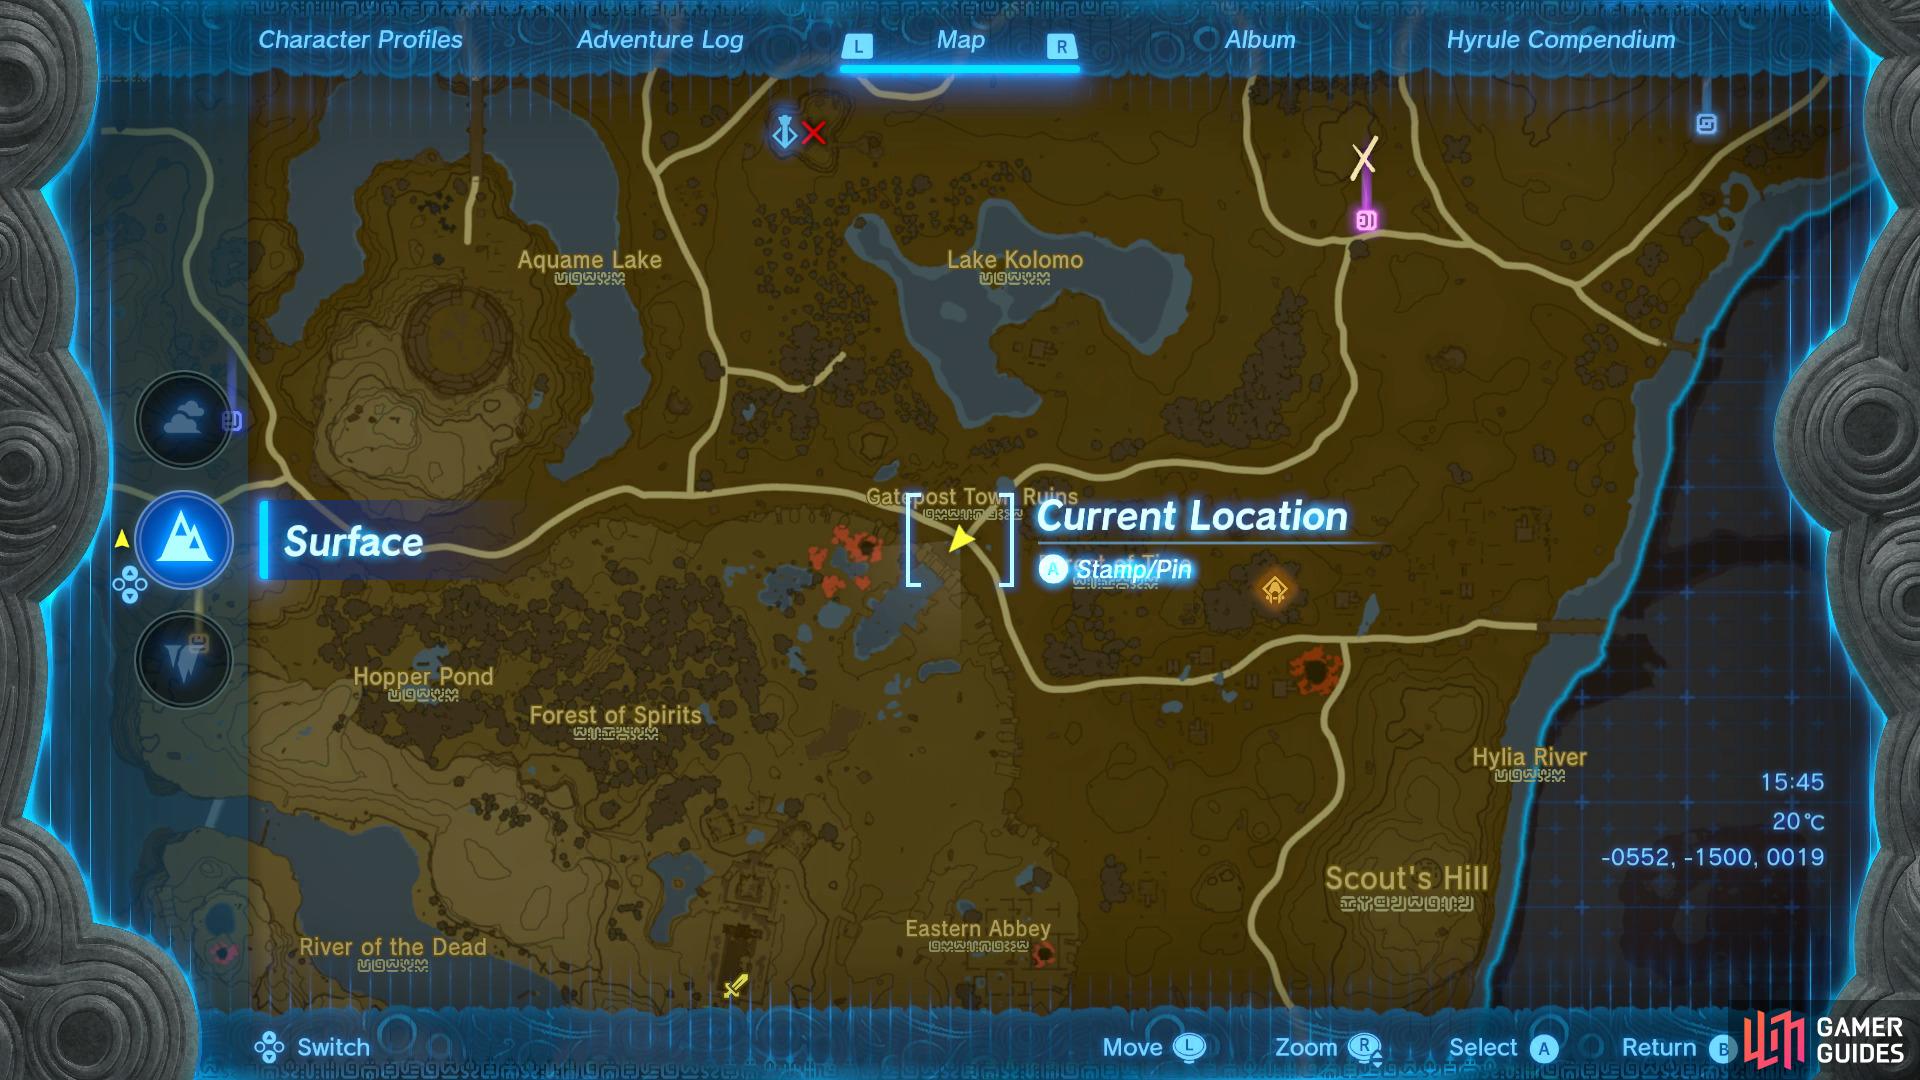 Head to this location on the map and smash the rocks to start the quest.